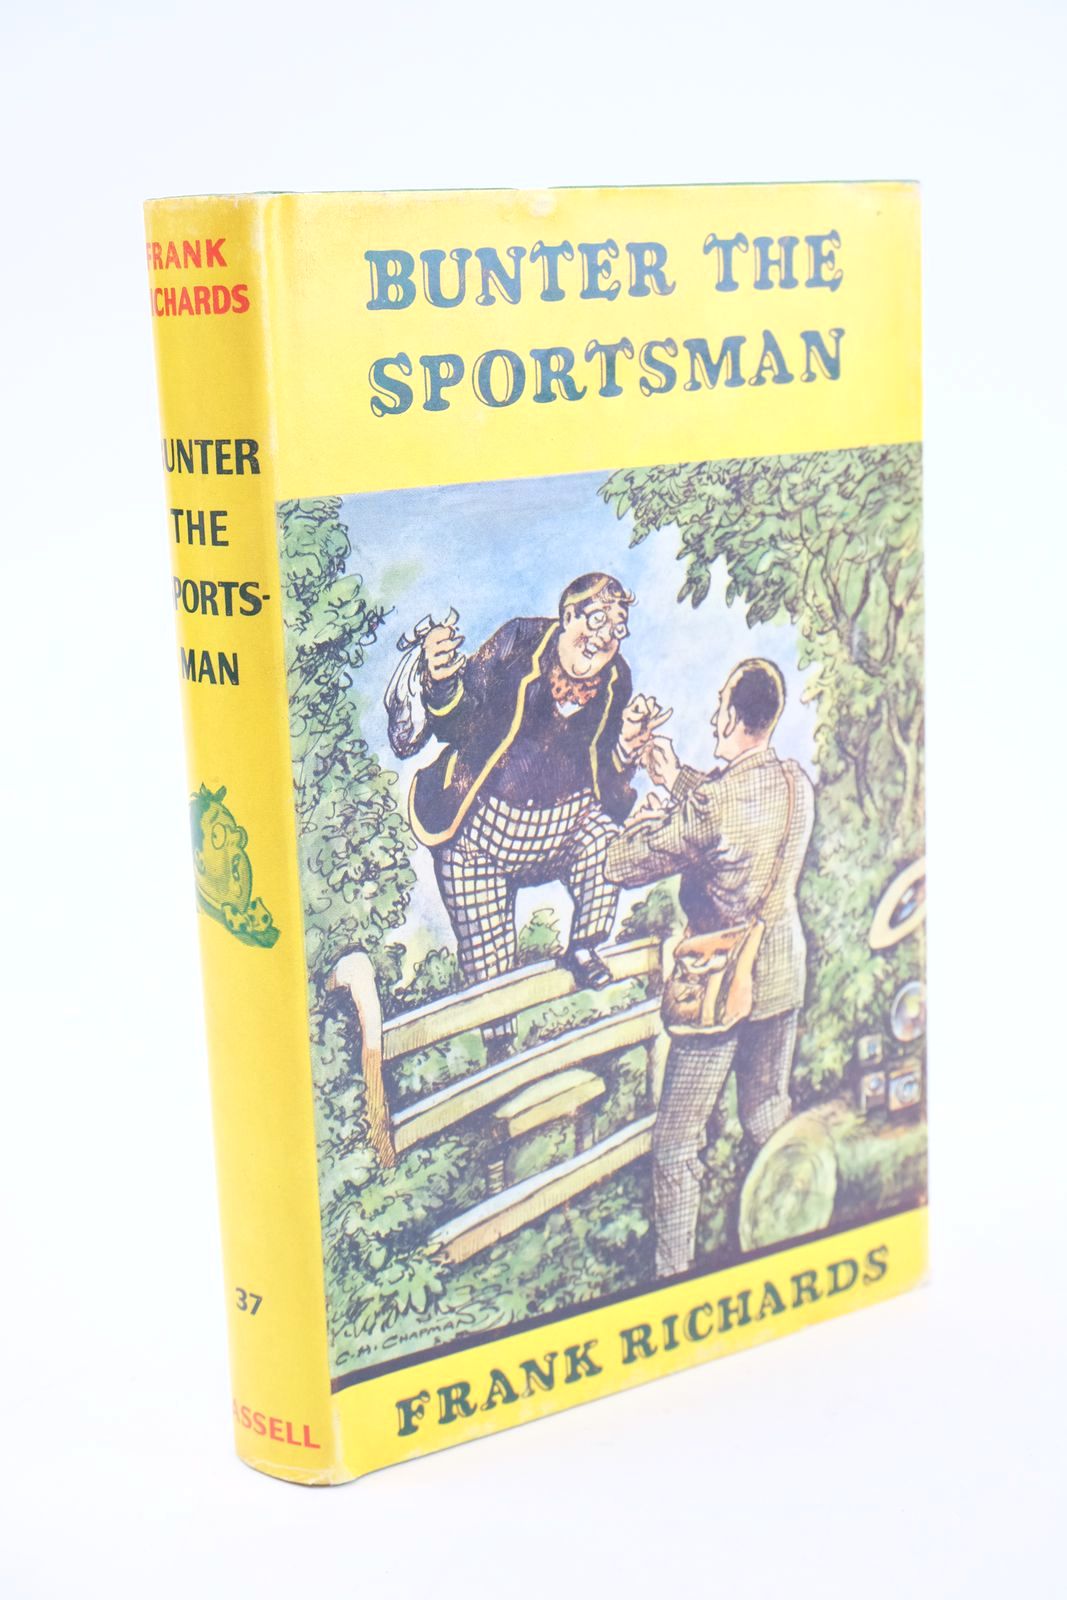 Photo of BUNTER THE SPORTSMAN written by Richards, Frank illustrated by Chapman, C.H. published by Cassell & Co. Ltd. (STOCK CODE: 1323959)  for sale by Stella & Rose's Books